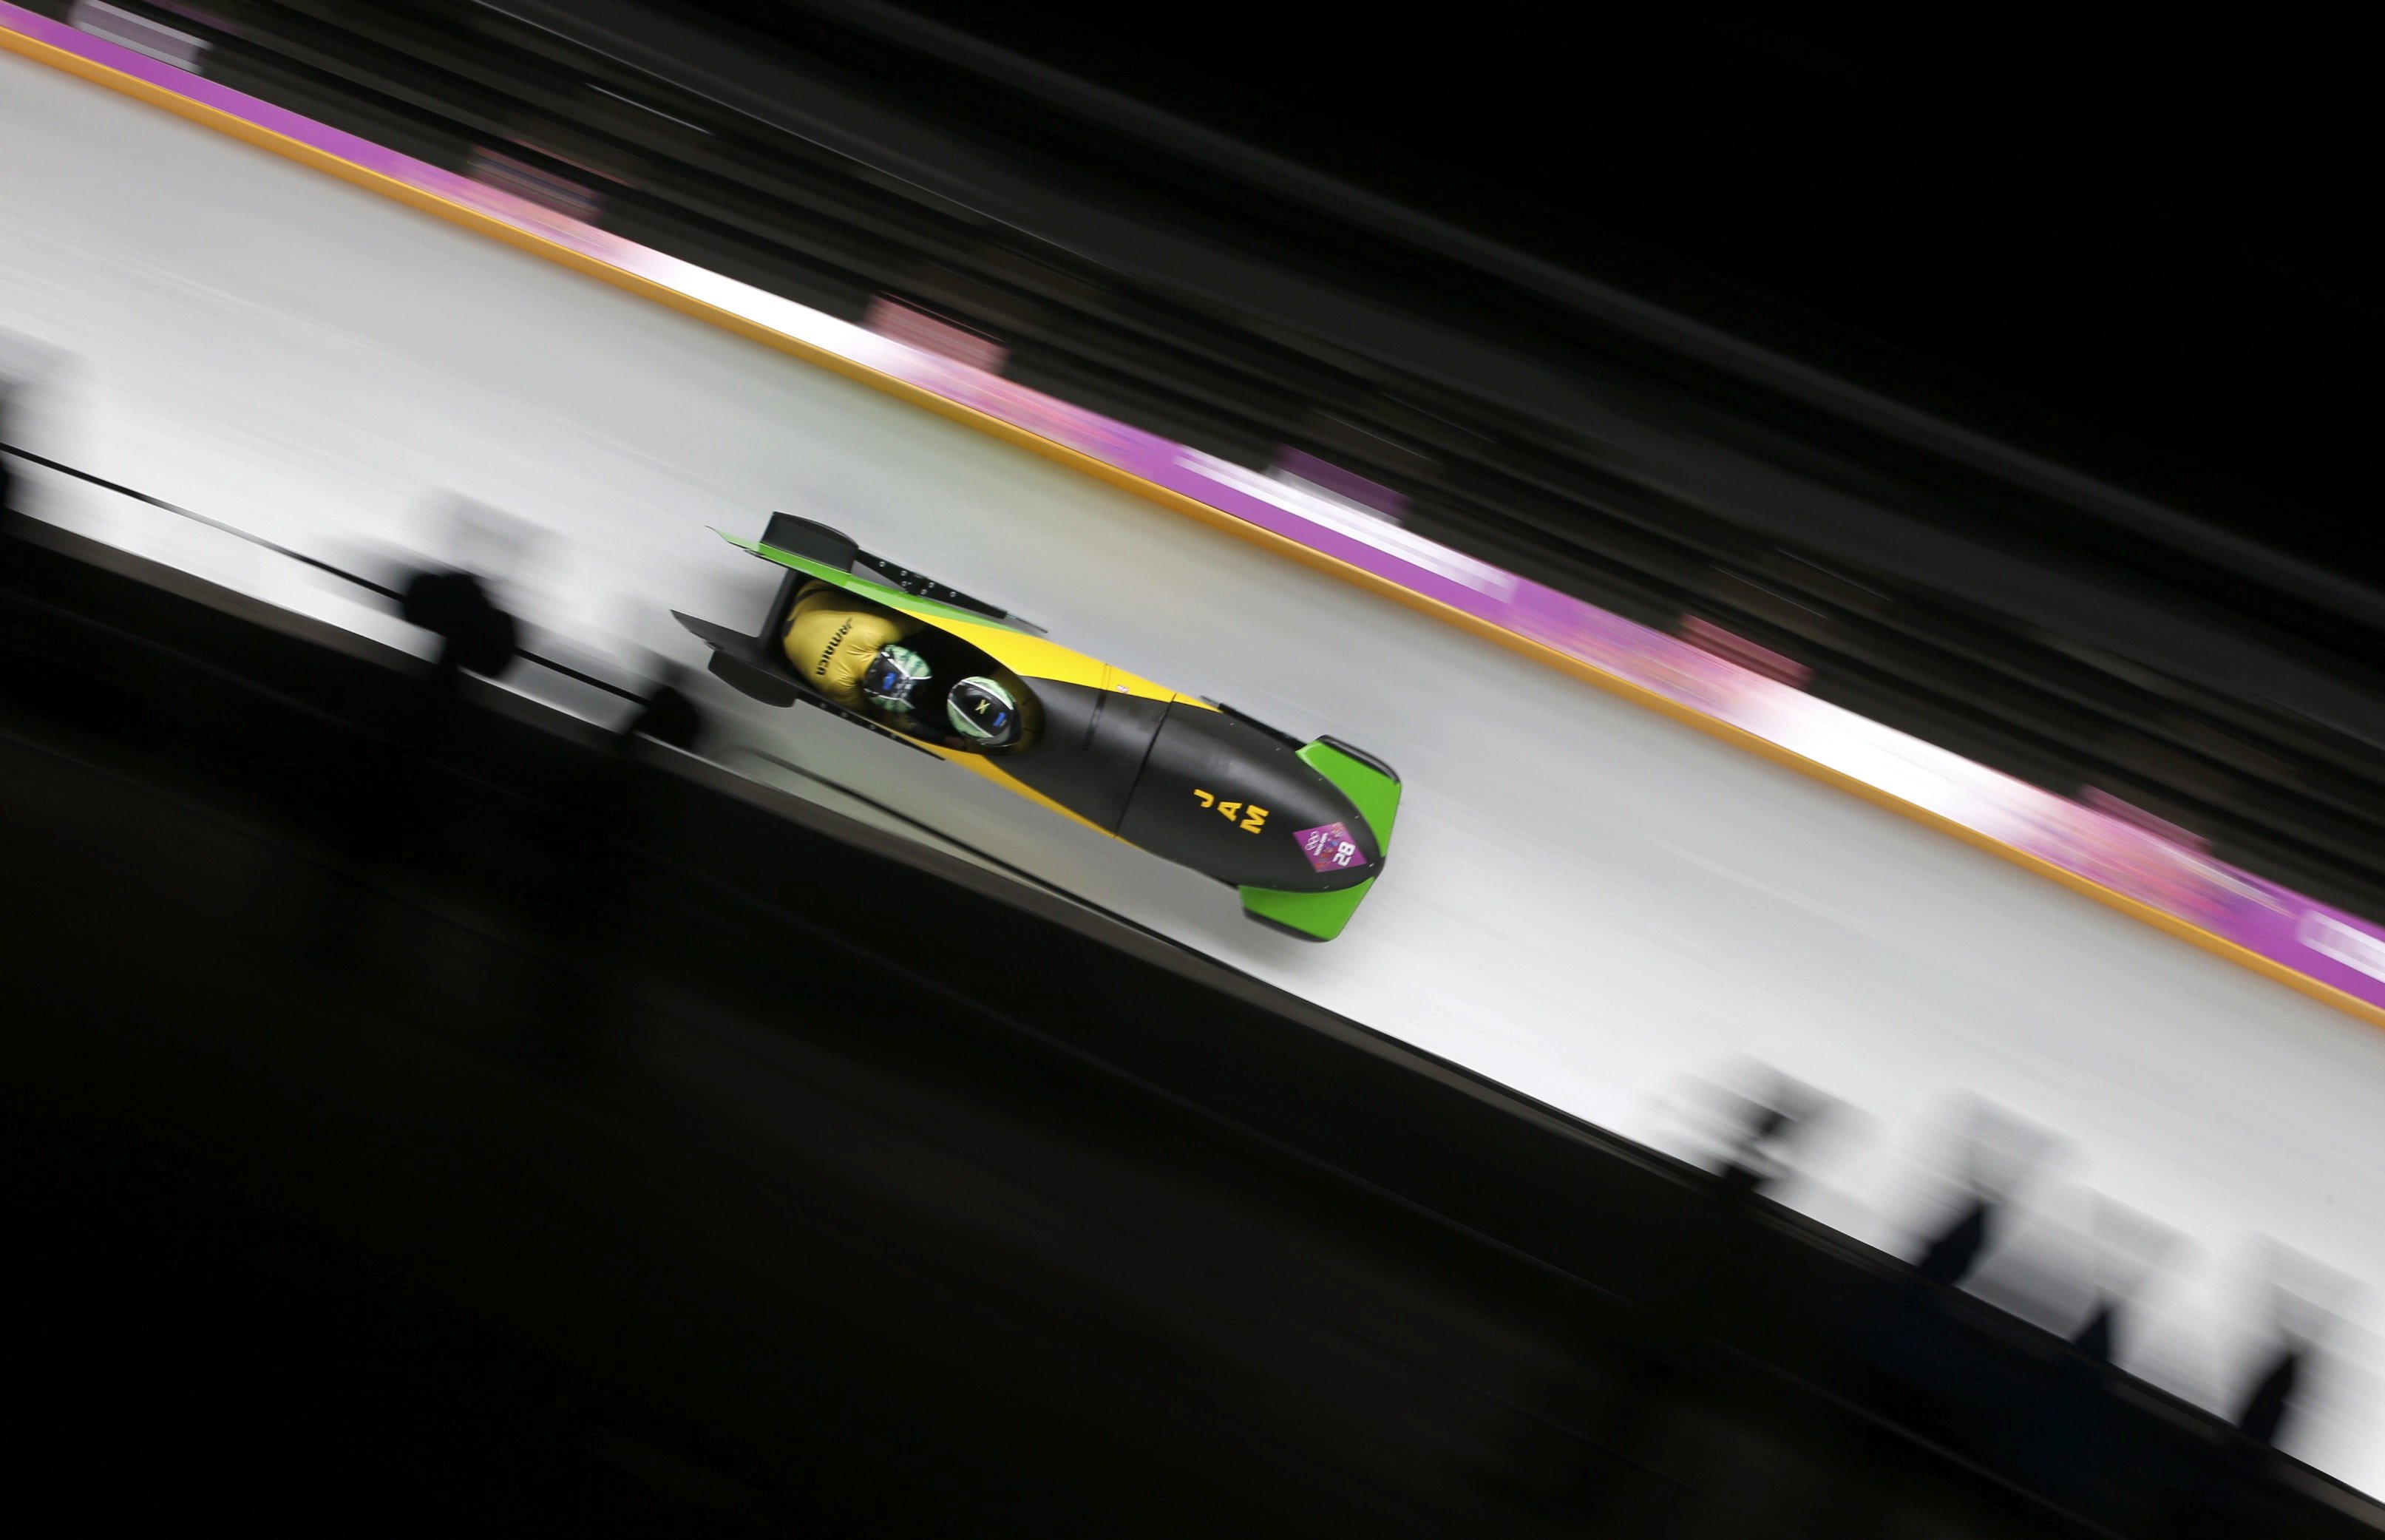 Jamaica's Winston Watts and Marvin Dixon speed down the track during the two-man bobsleigh event at the 2014 Sochi Winter Olympics, at the Sanki Sliding Center in Rosa Khutor February 16, 2014. (Fabrizio Bensch—Reuters)